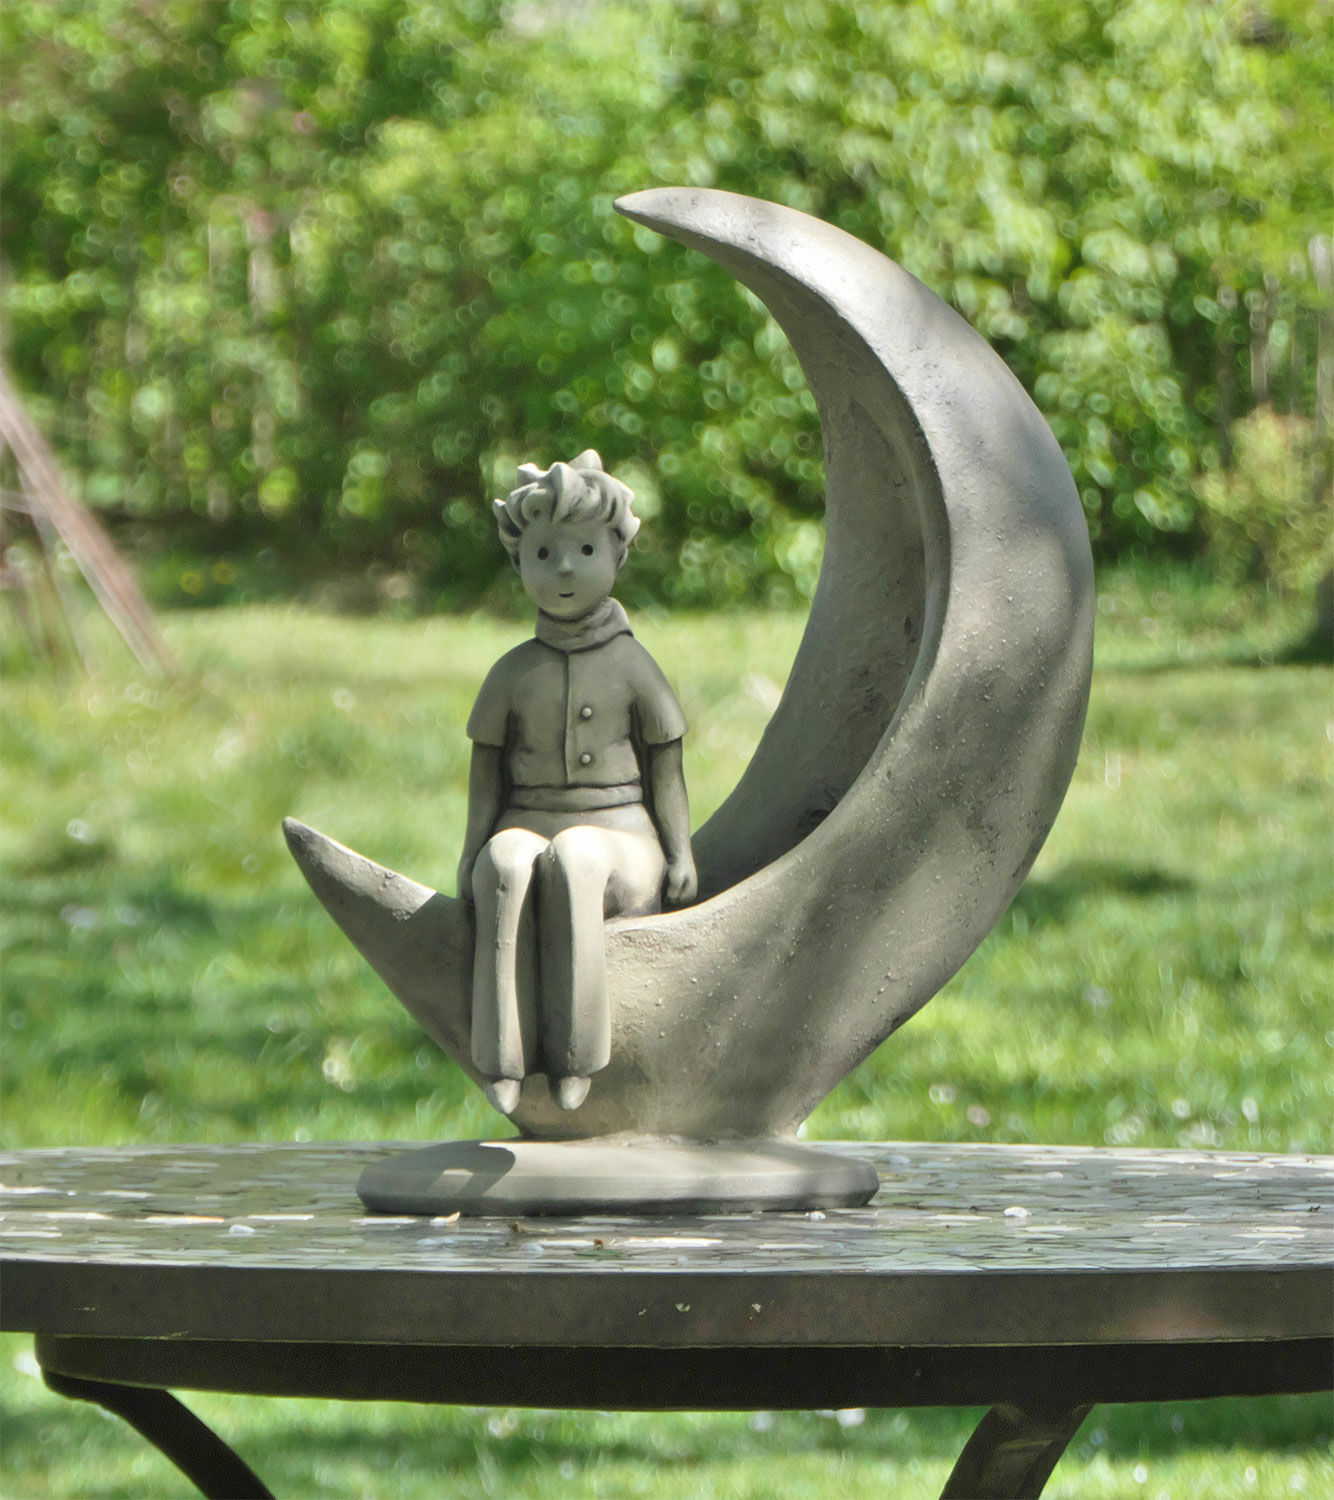 Garden sculpture "The Little Prince in the Moon", cast stone